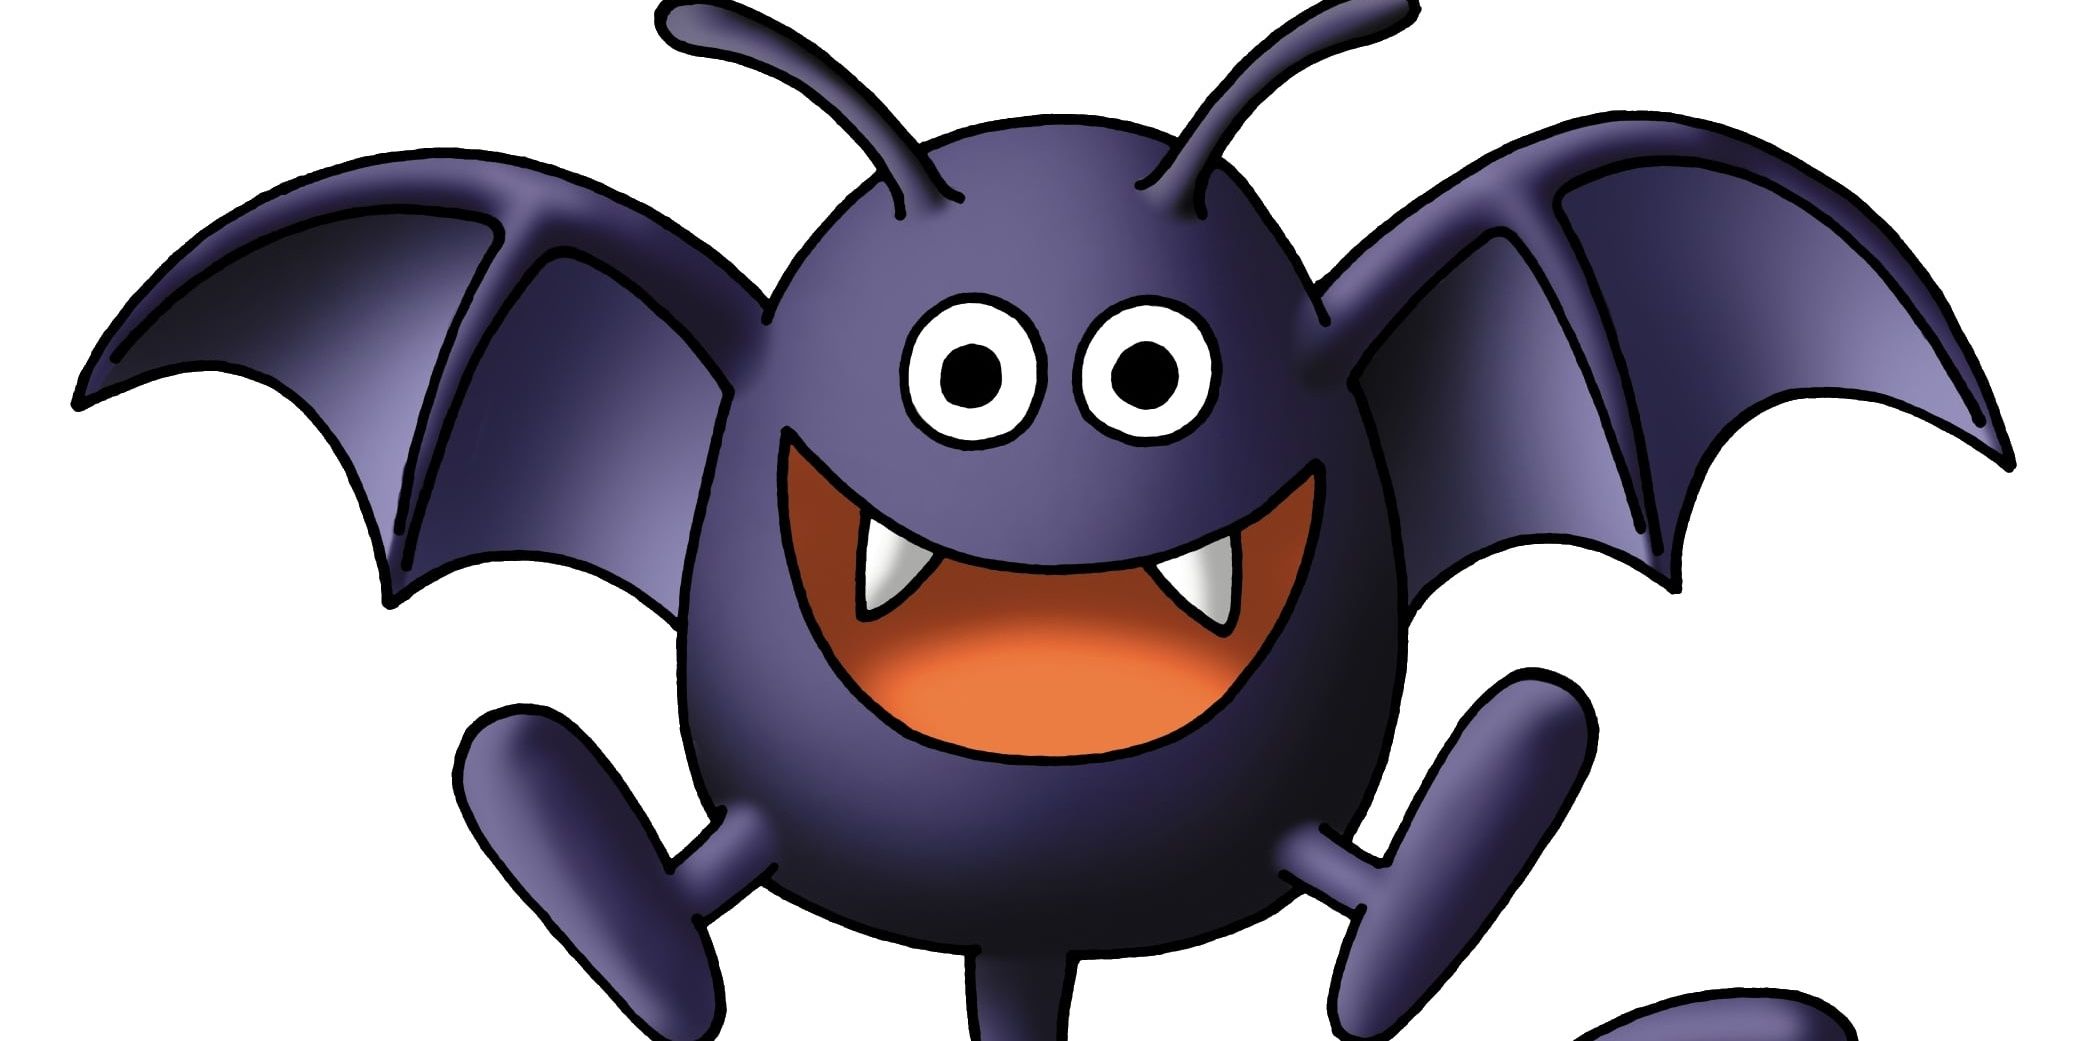 Official artwork of the Dracky from Dragon Quest